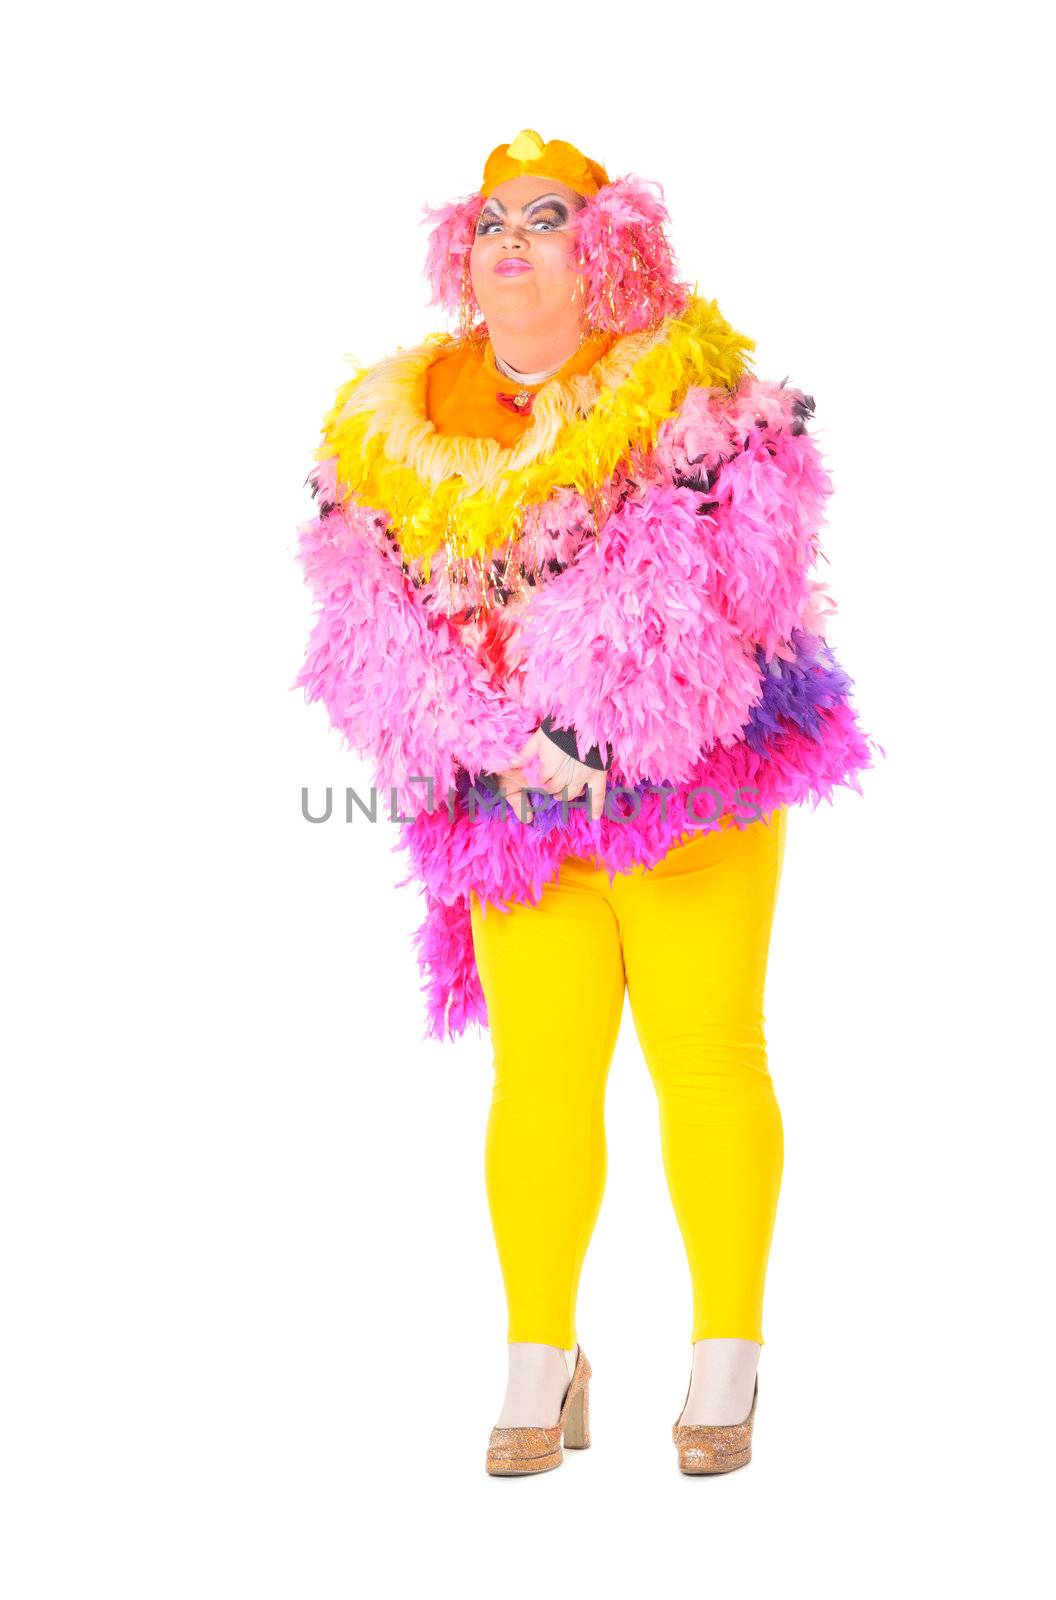 Cheerful man, Drag Queen, in a Female Suit by Discovod